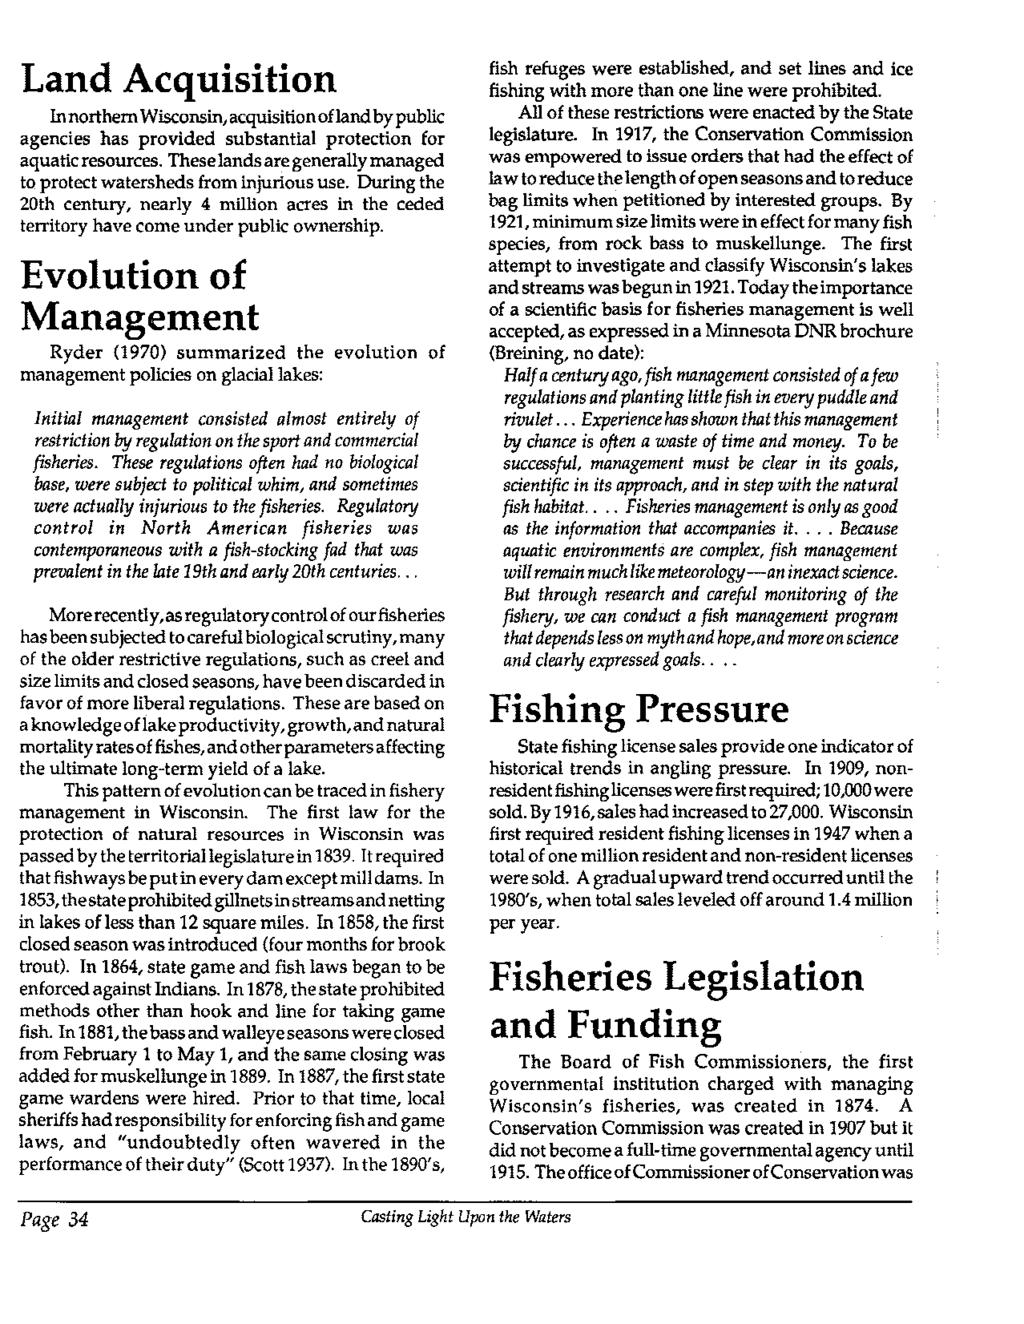 Land Acquisition In northern Wisconsin, acquisition of land by public agencies has provided substantial protection for aquatic resources.